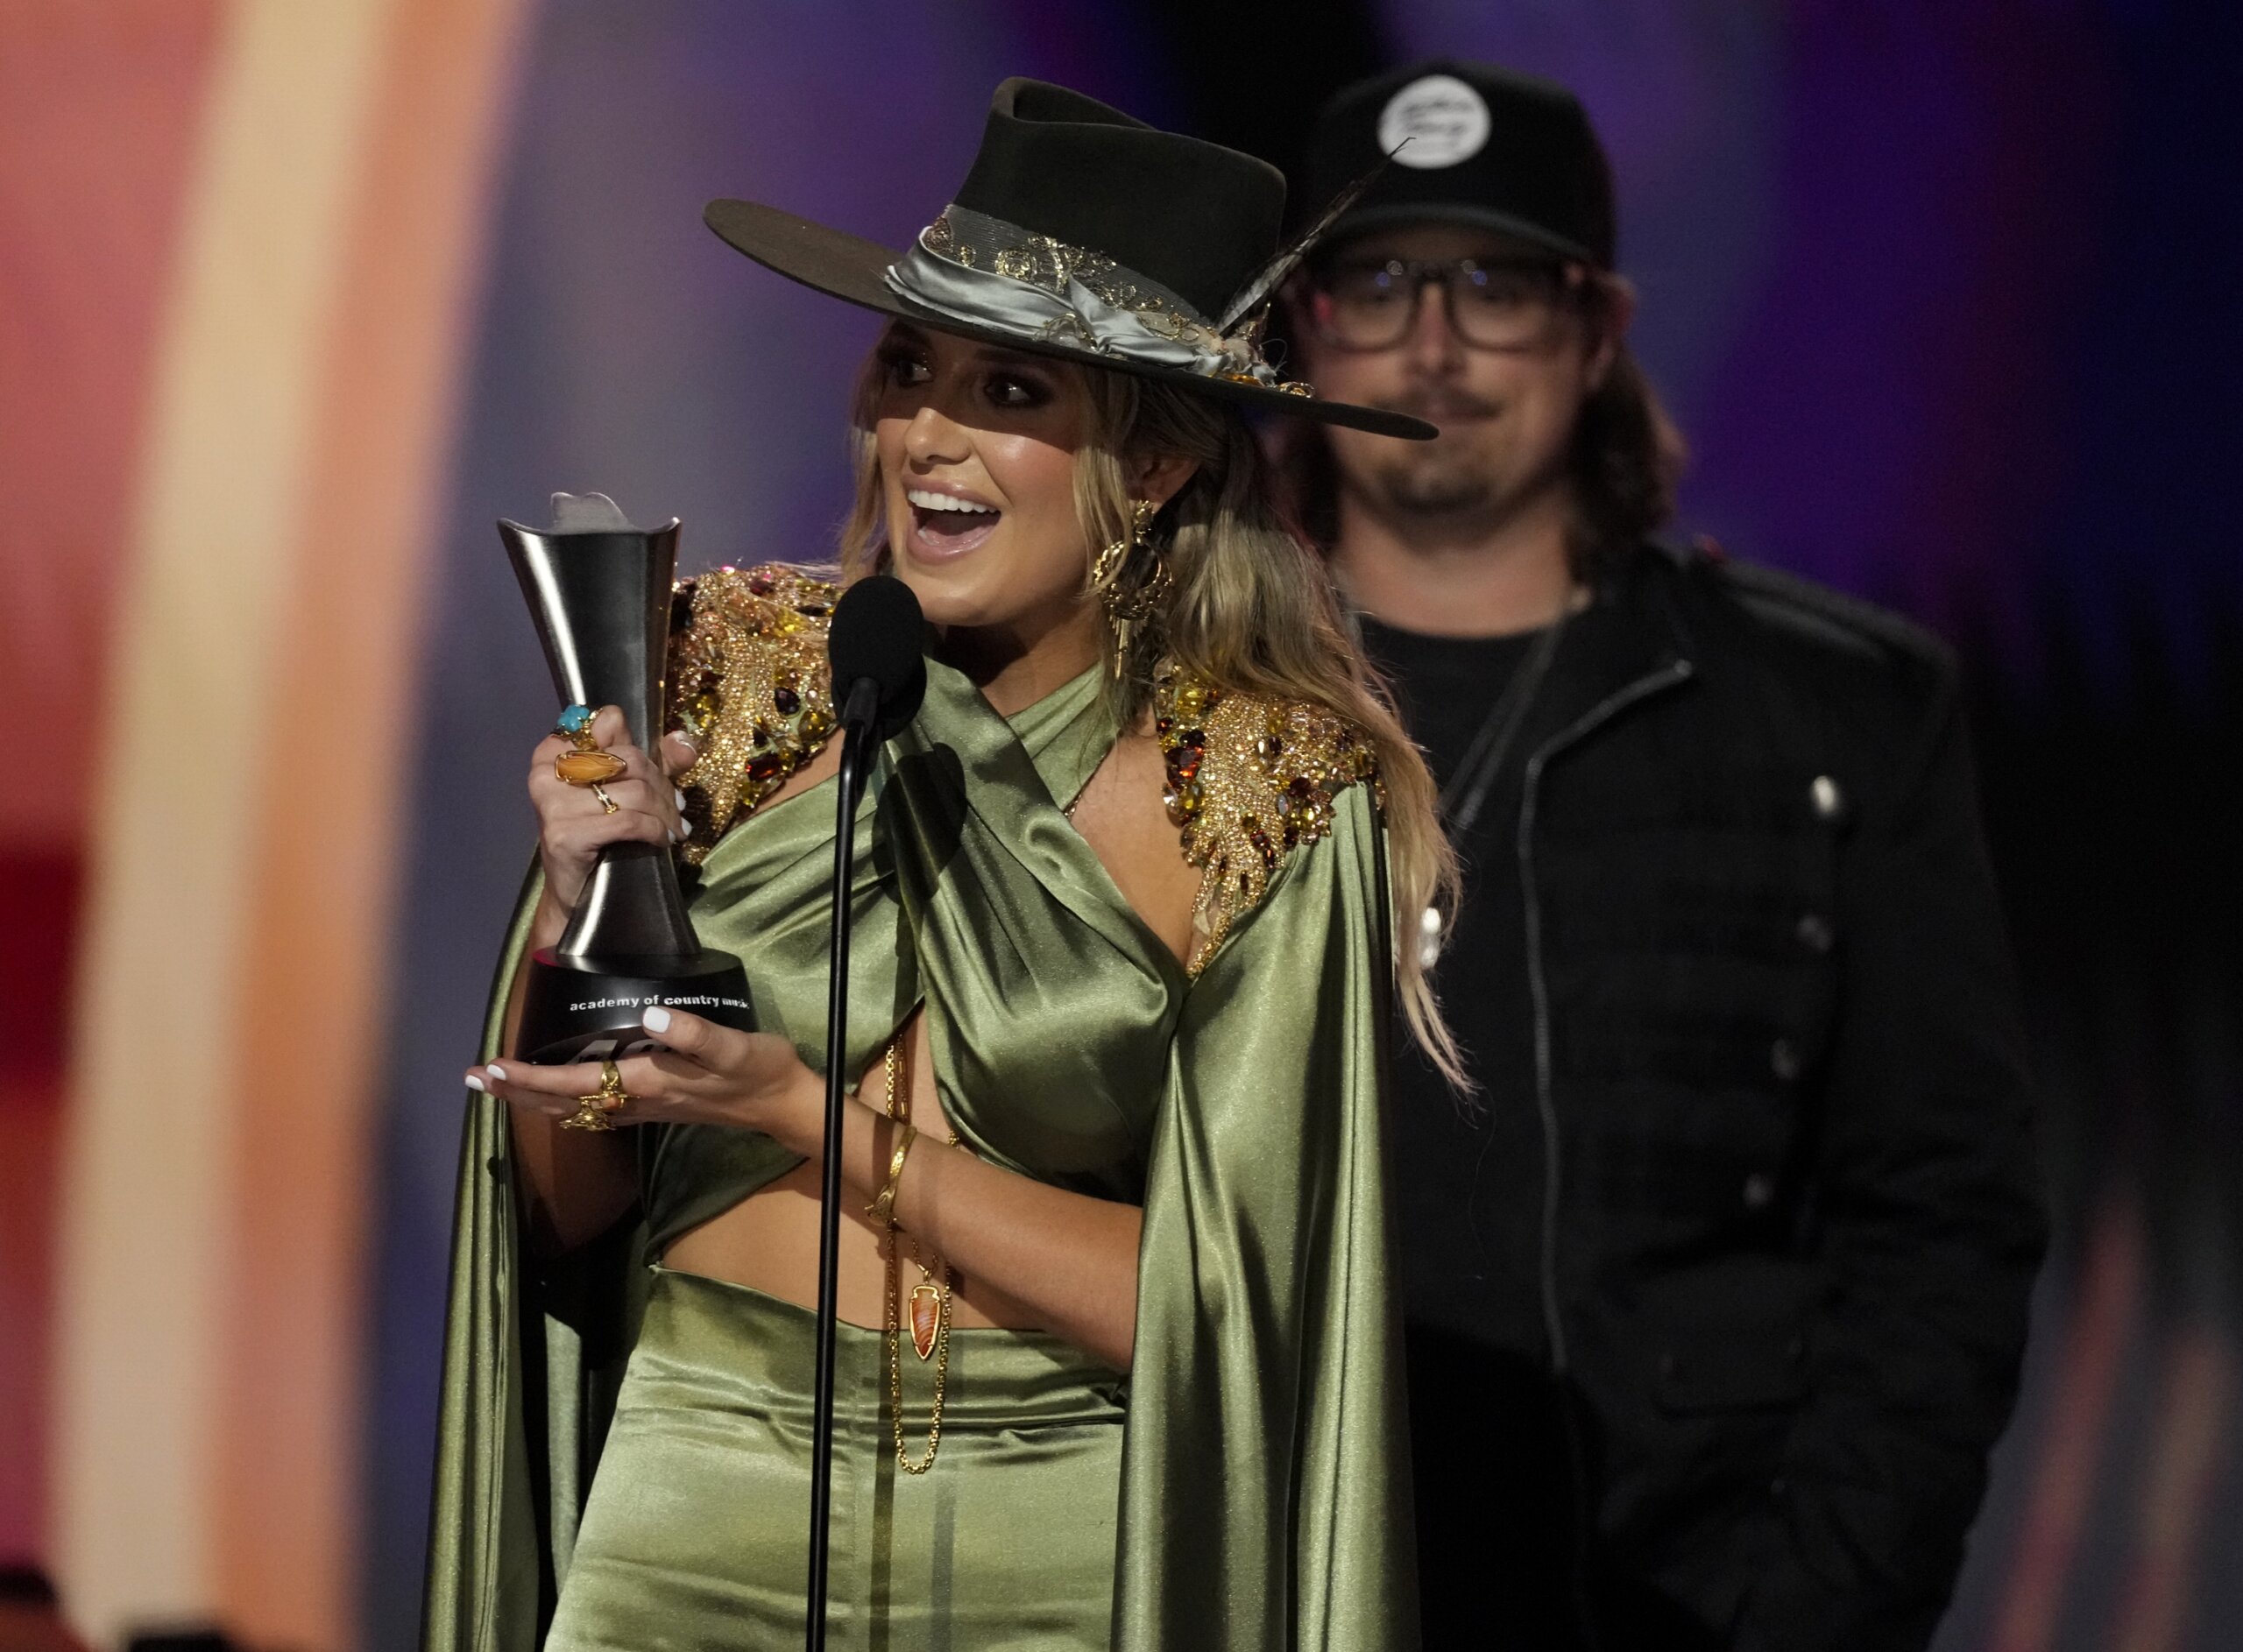 Lainey Wilson triumphs at Academy of Country Music Awards; Chris